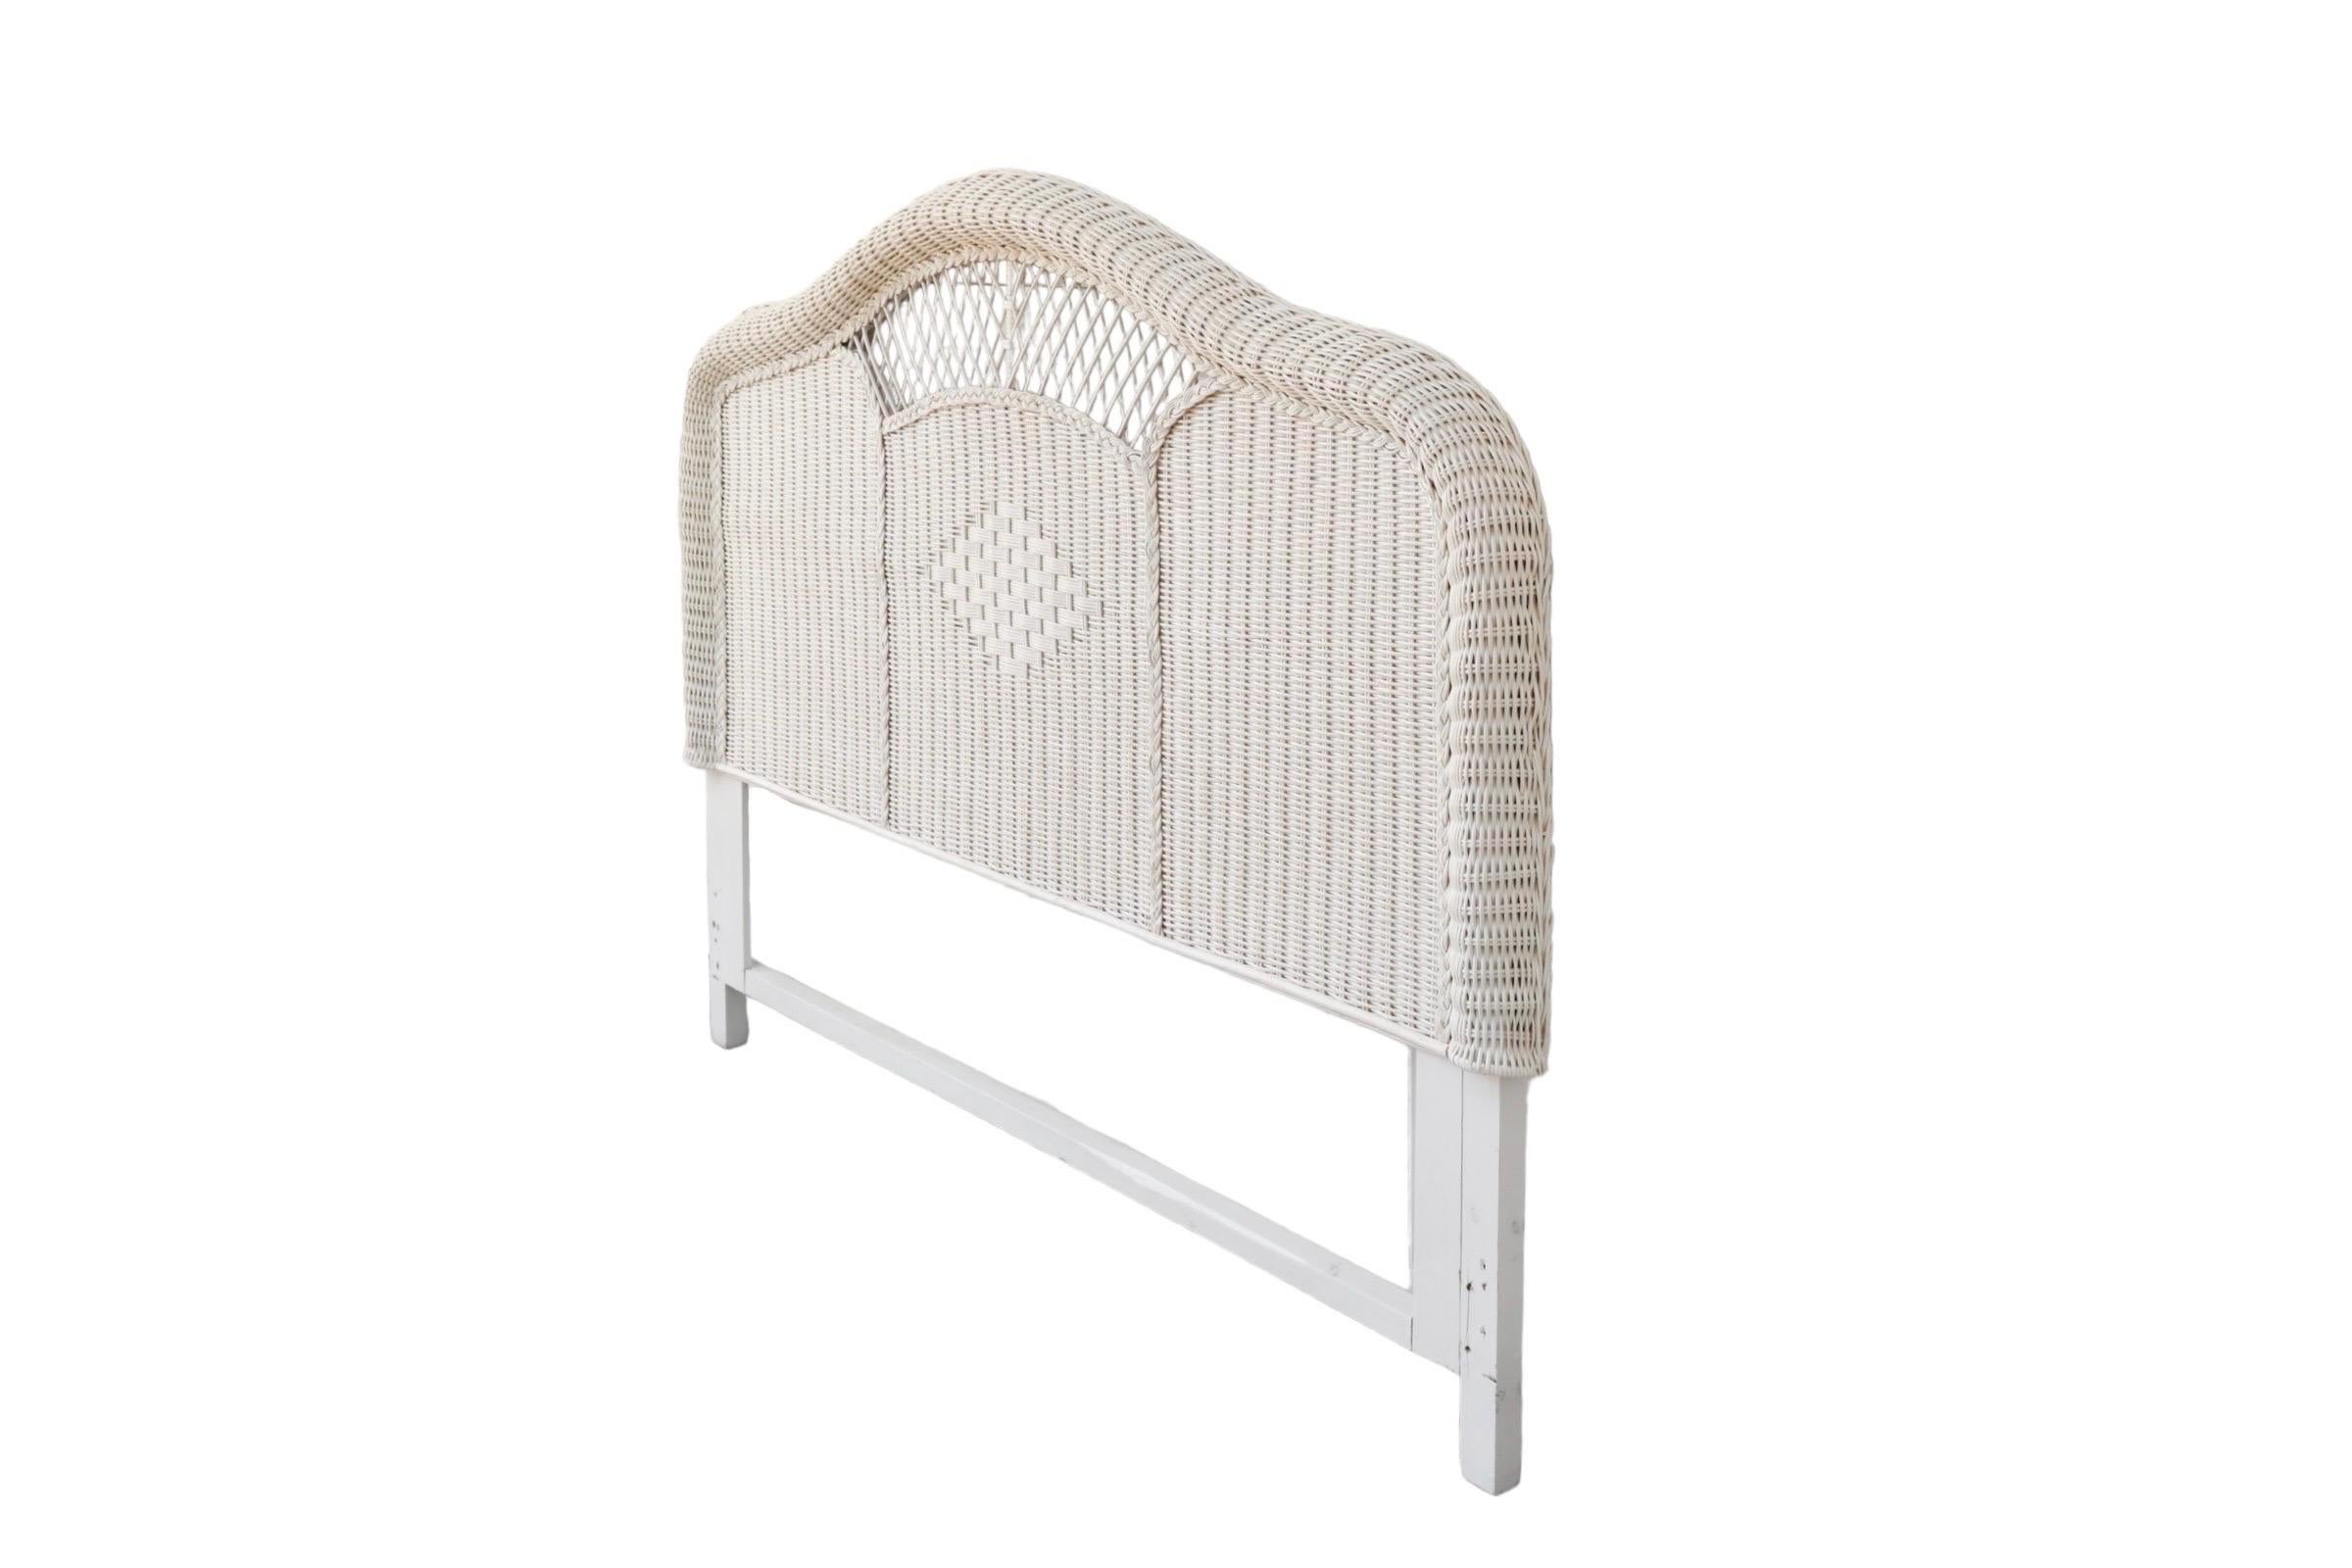 A Heywood Wakefield style queen size wicker headboard. A bentwood bamboo frame supports curved woven rattan in a camel back shape. Decorated with an open weave window above a traditional Heywood Wakefield style diamond. Finished throughout with a